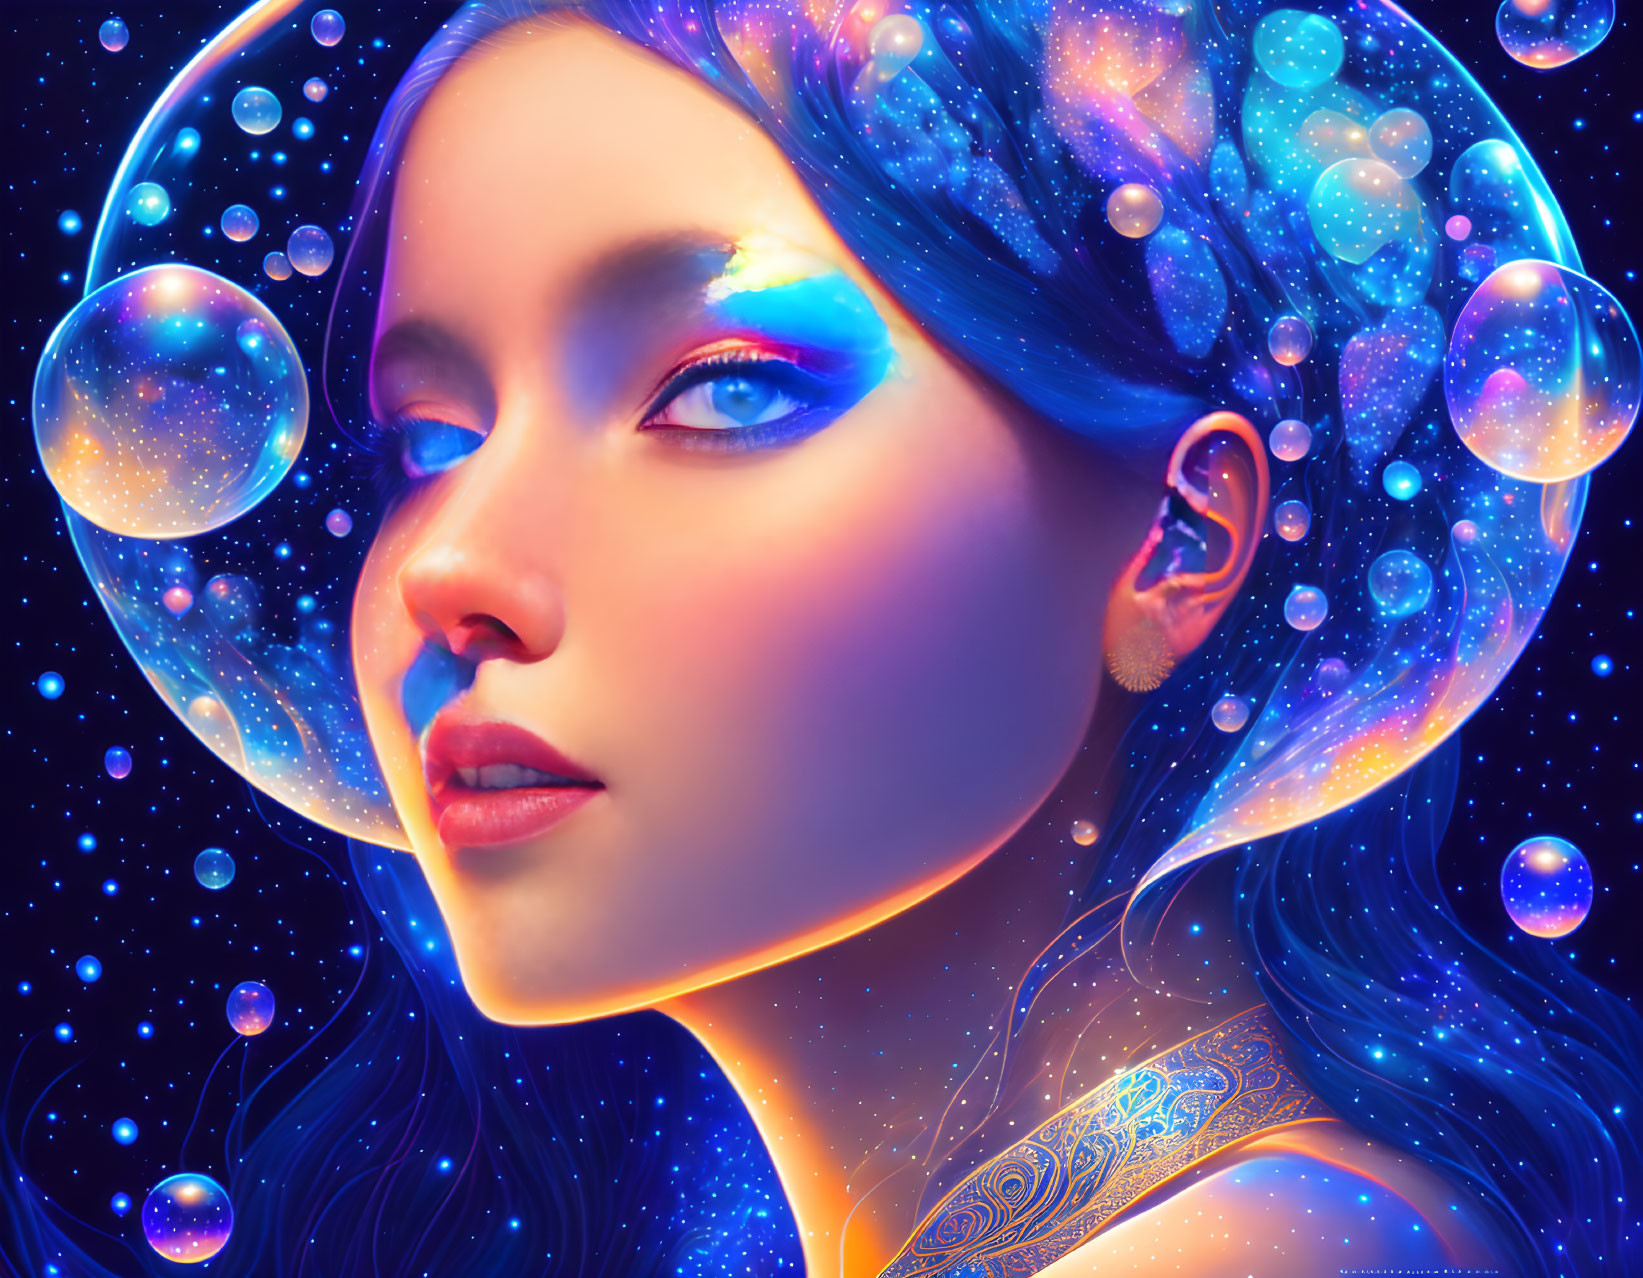 Cosmic Enchantment: The Girl of Lights and Blue Bu